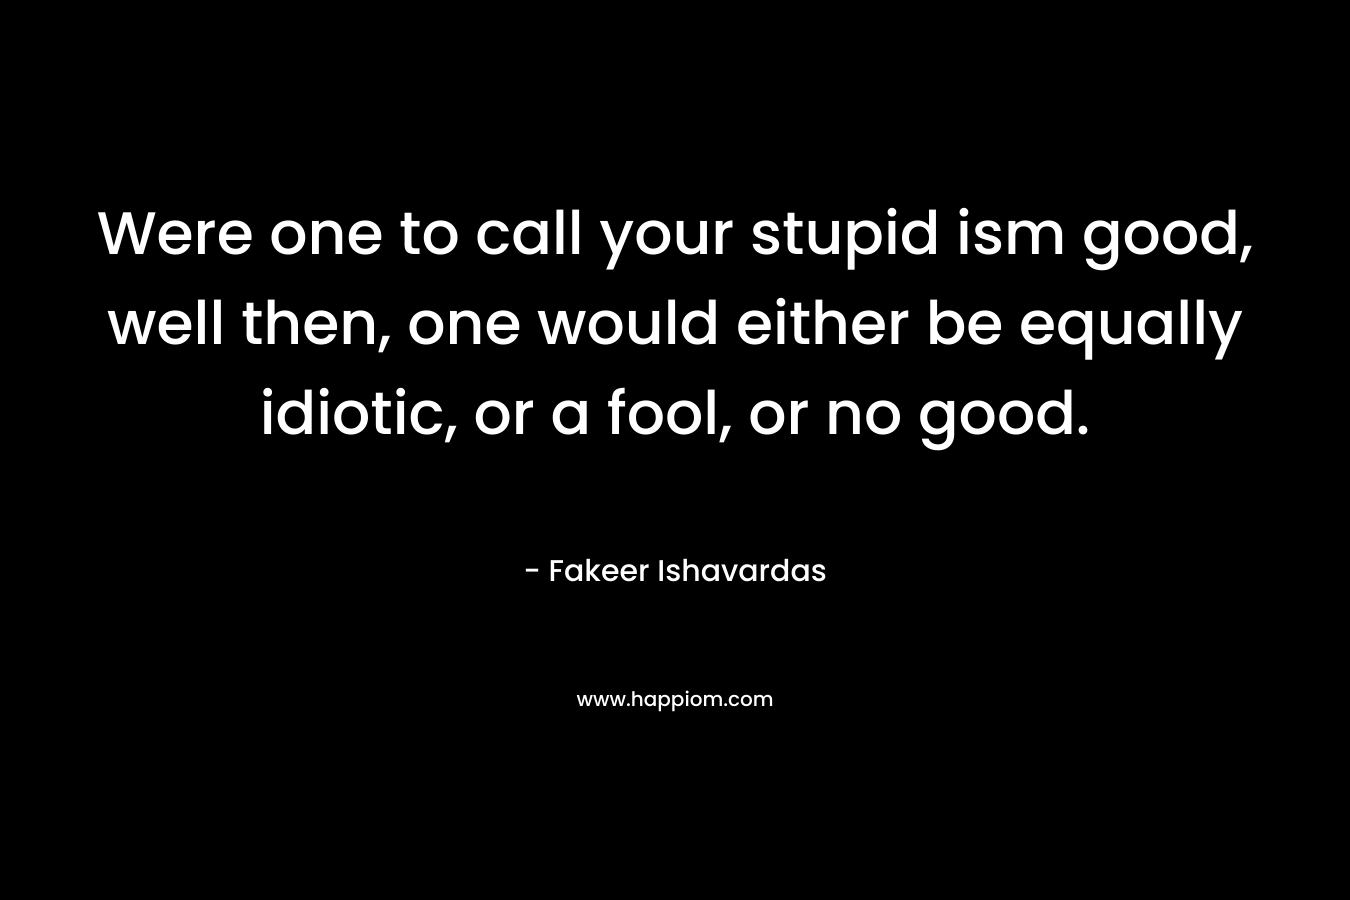 Were one to call your stupid ism good, well then, one would either be equally idiotic, or a fool, or no good. – Fakeer Ishavardas